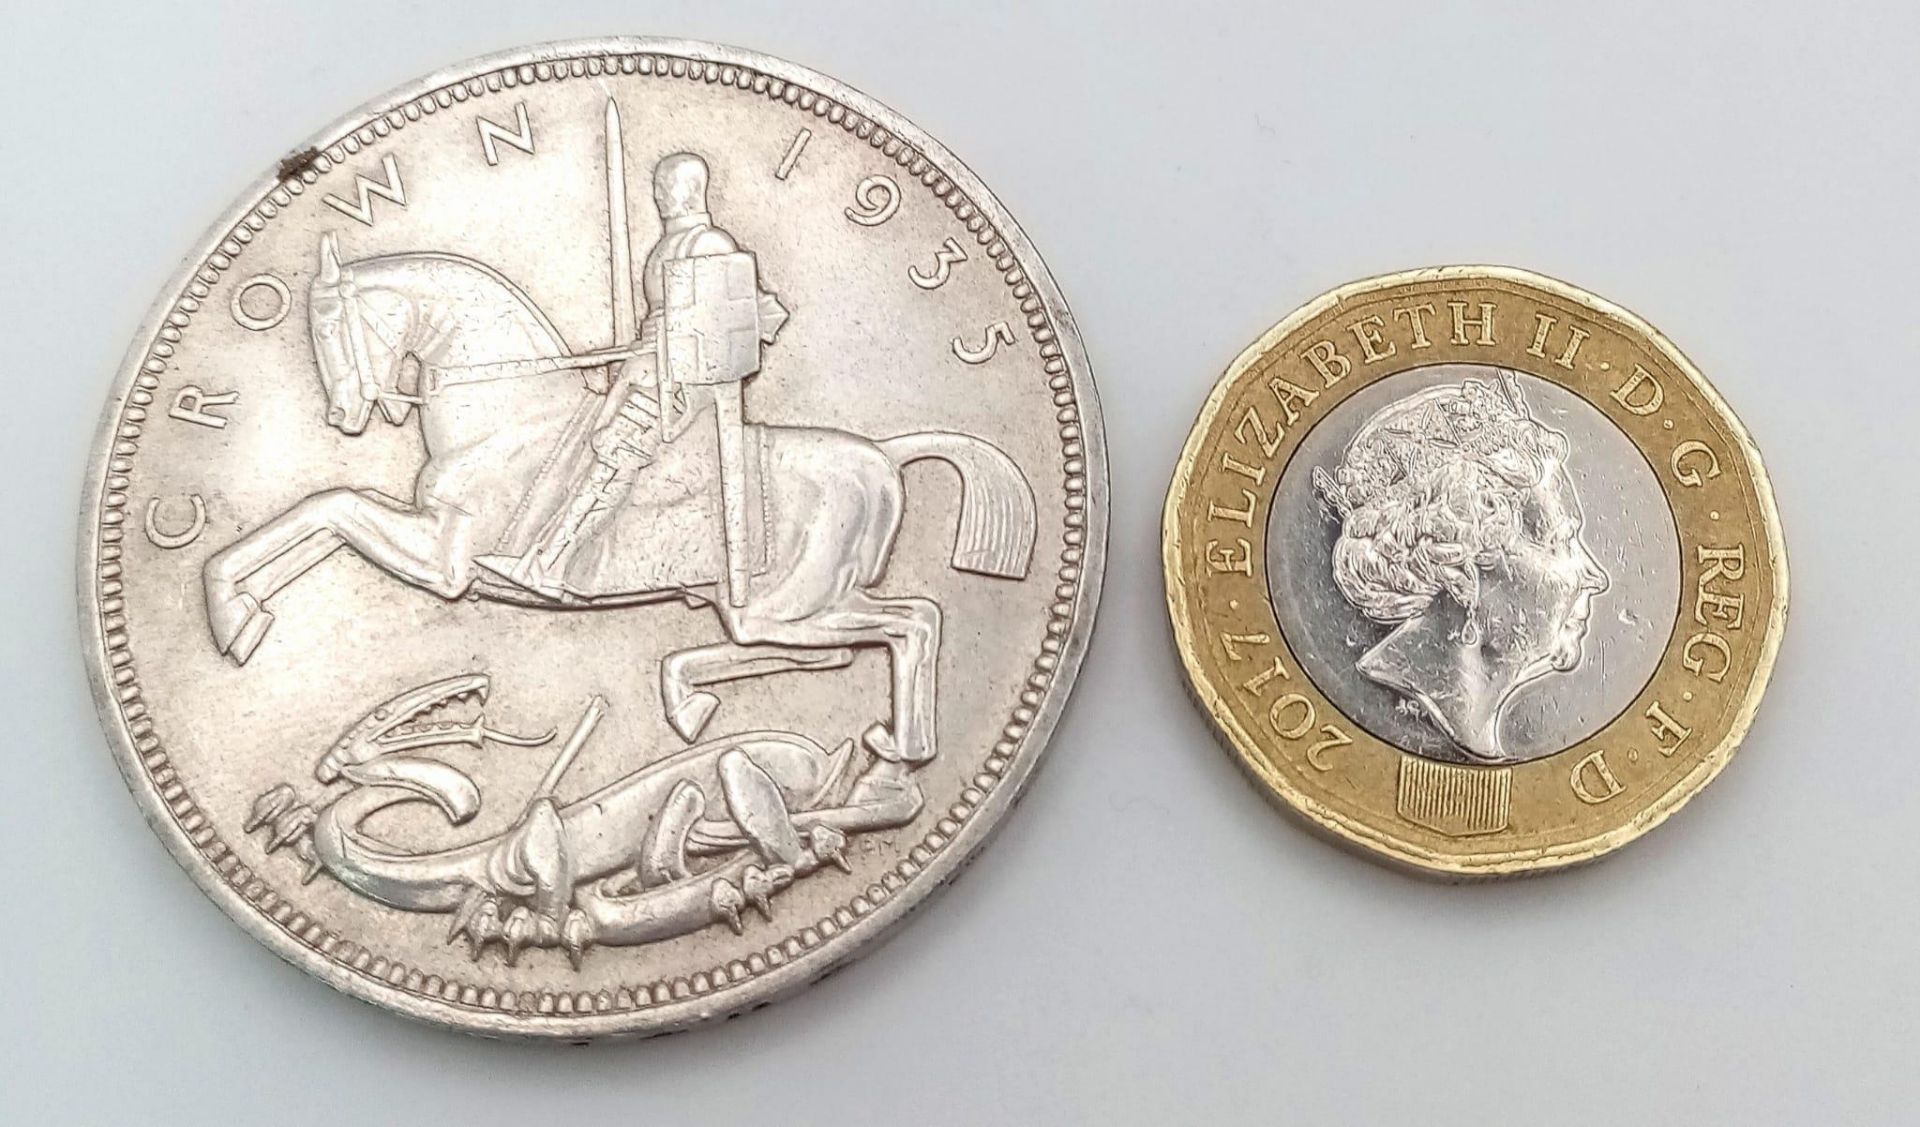 A 1935 George V Silver Rocking Horse Crown Coin. EF grade but please see photos. - Image 3 of 3